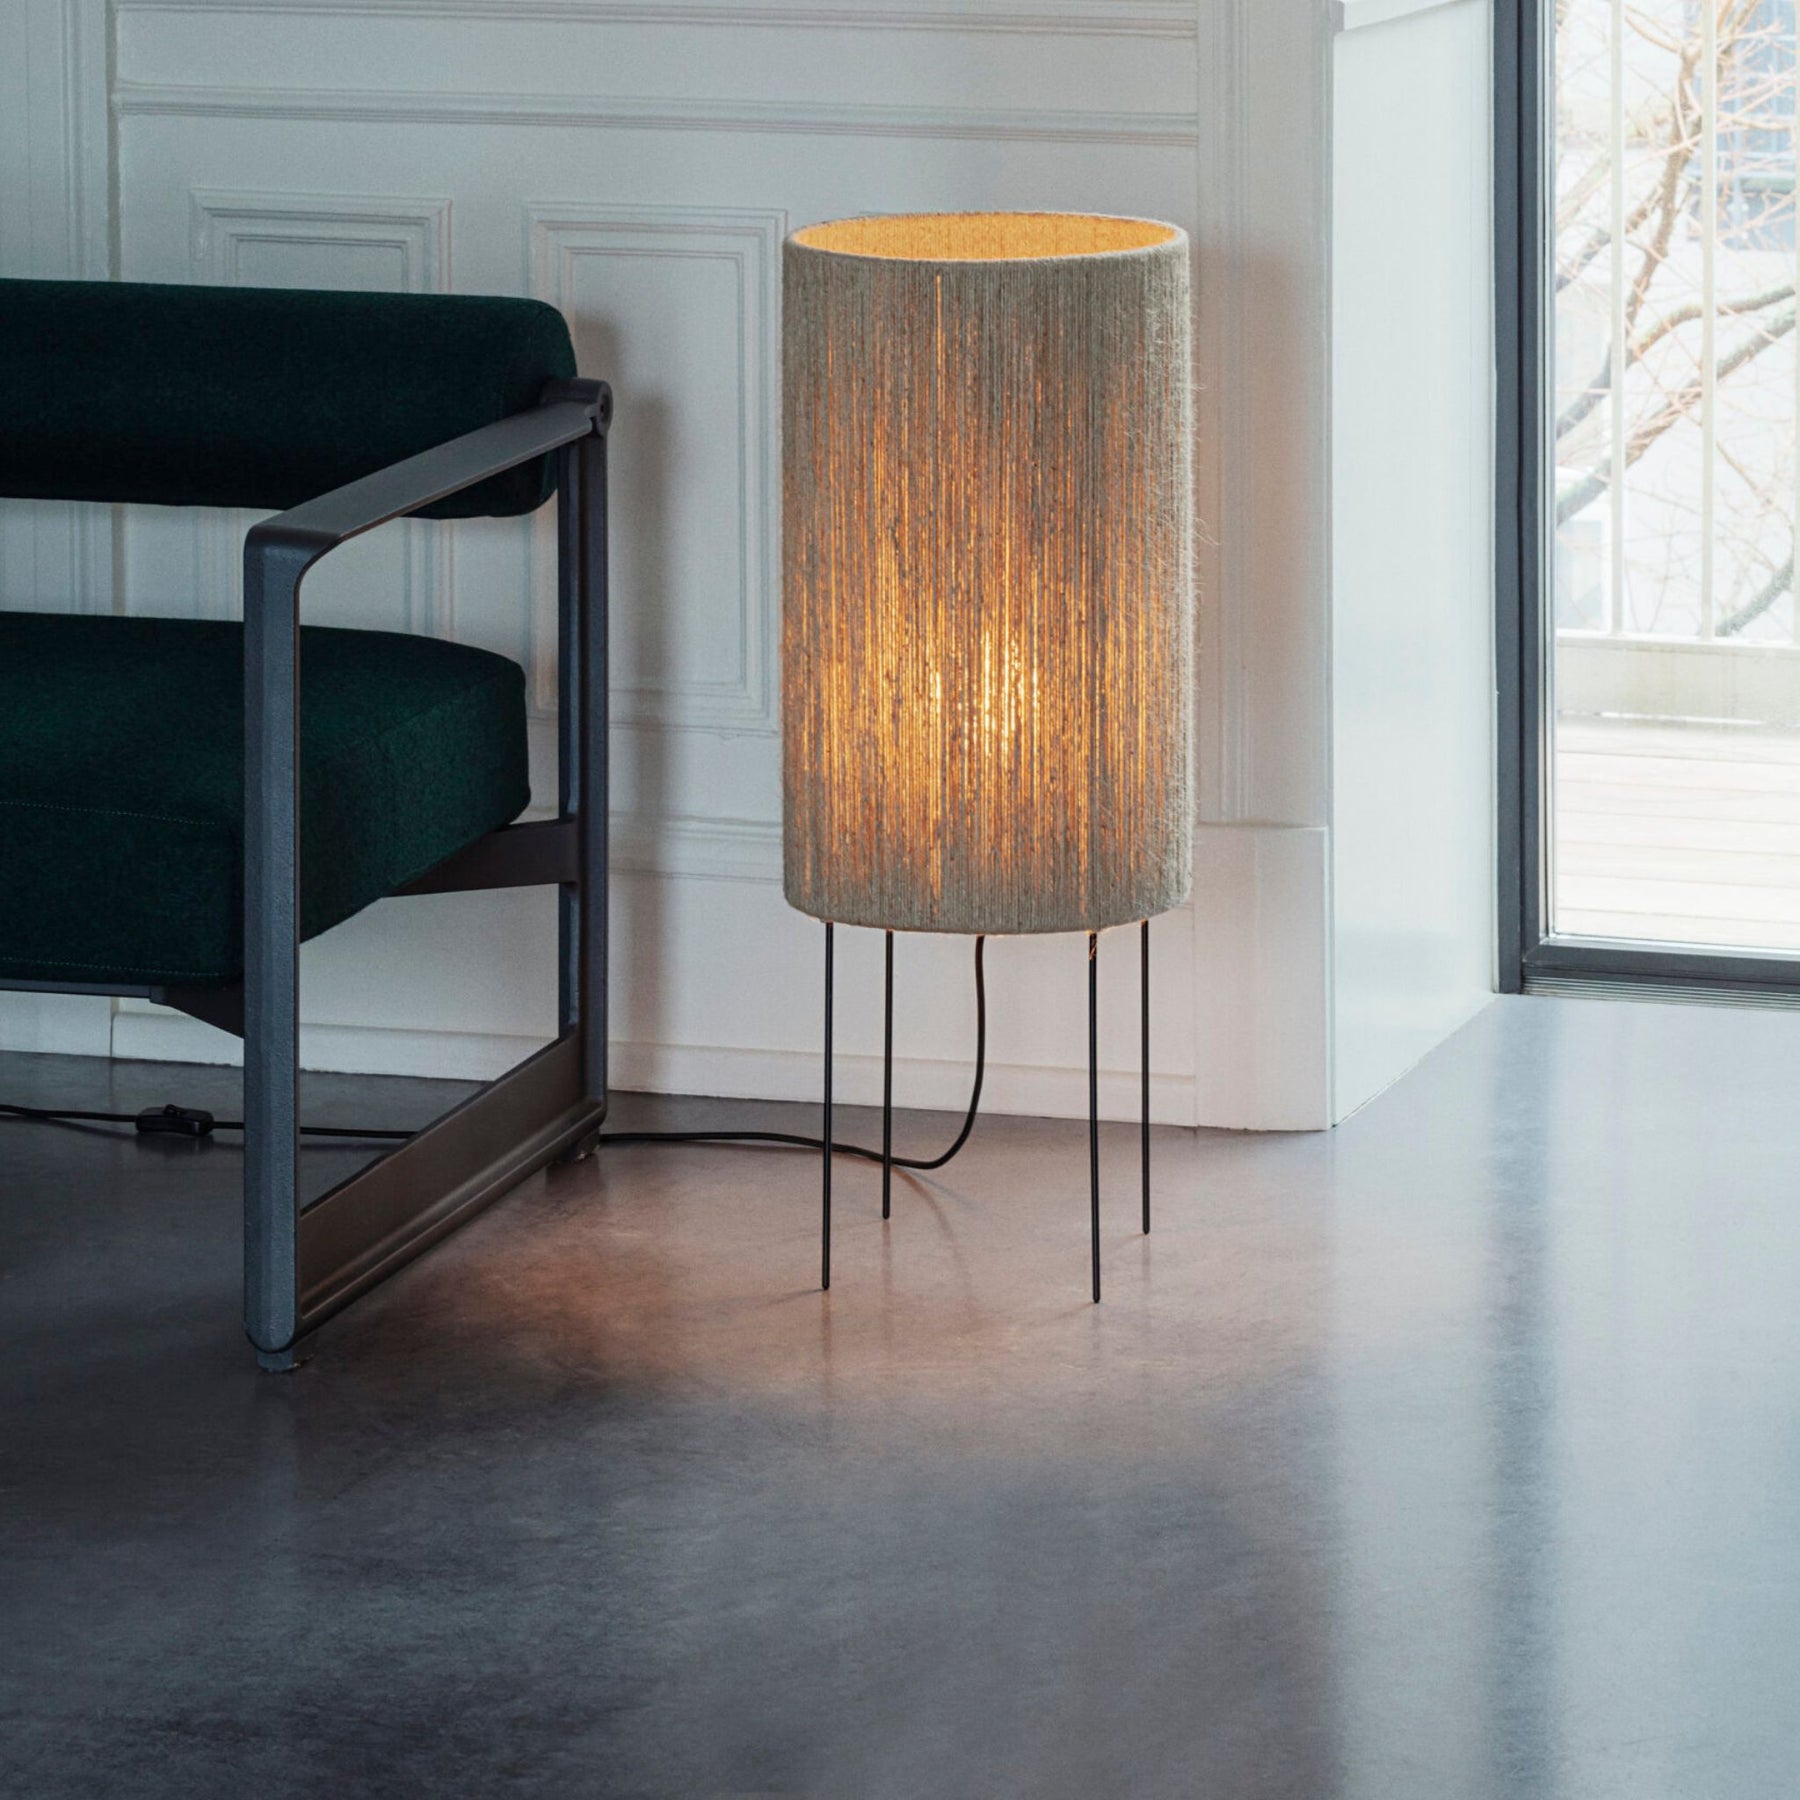 Made by Hand RO Floor Lamp 30 by Kim Richardt